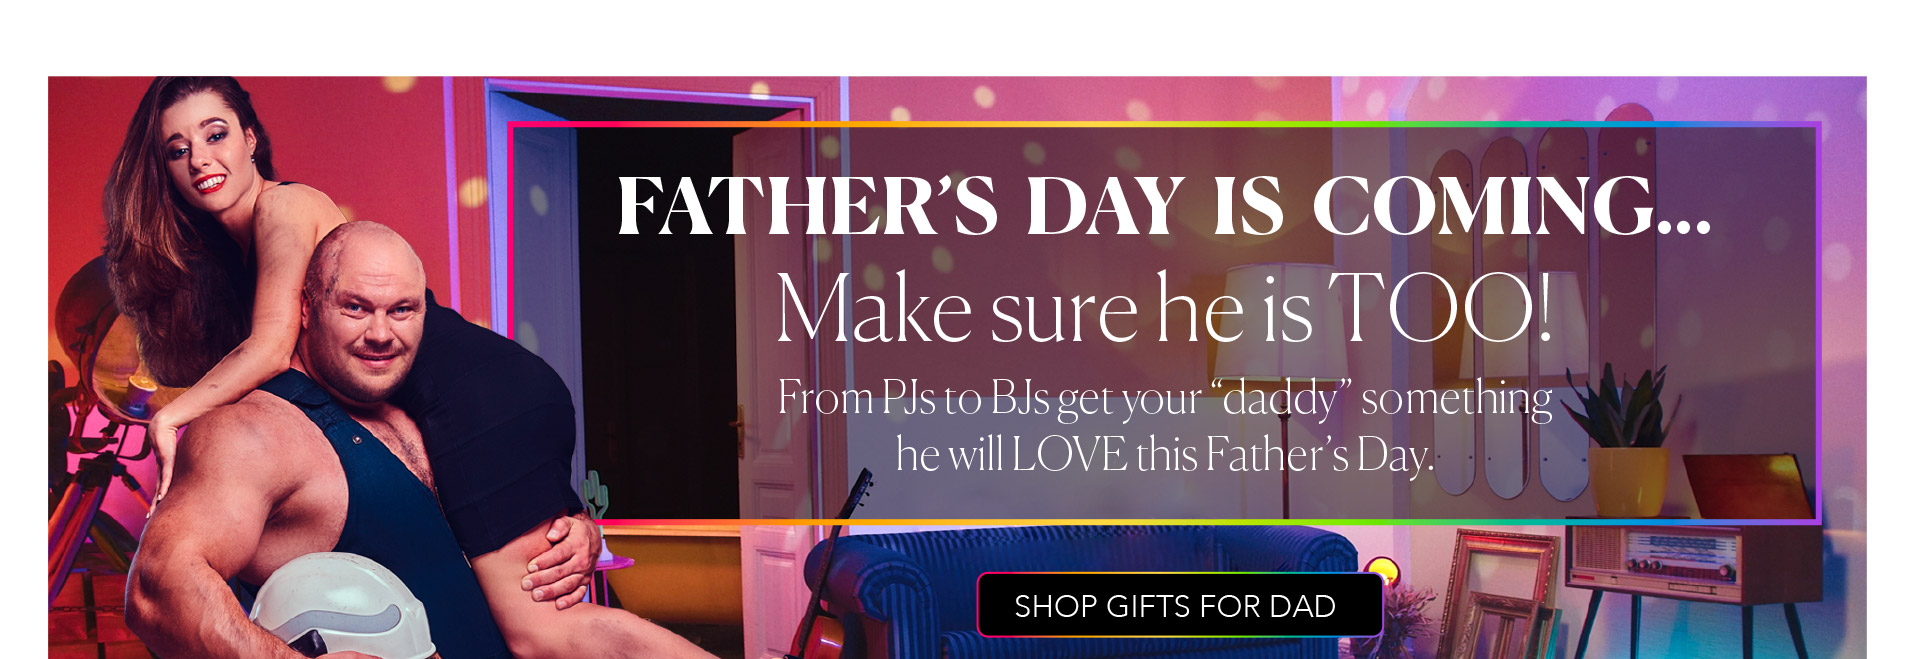 Father's Day is Coming... Make sure he is too! - From PJs to BJs get your daddy something he will LOVE this Father's Day.